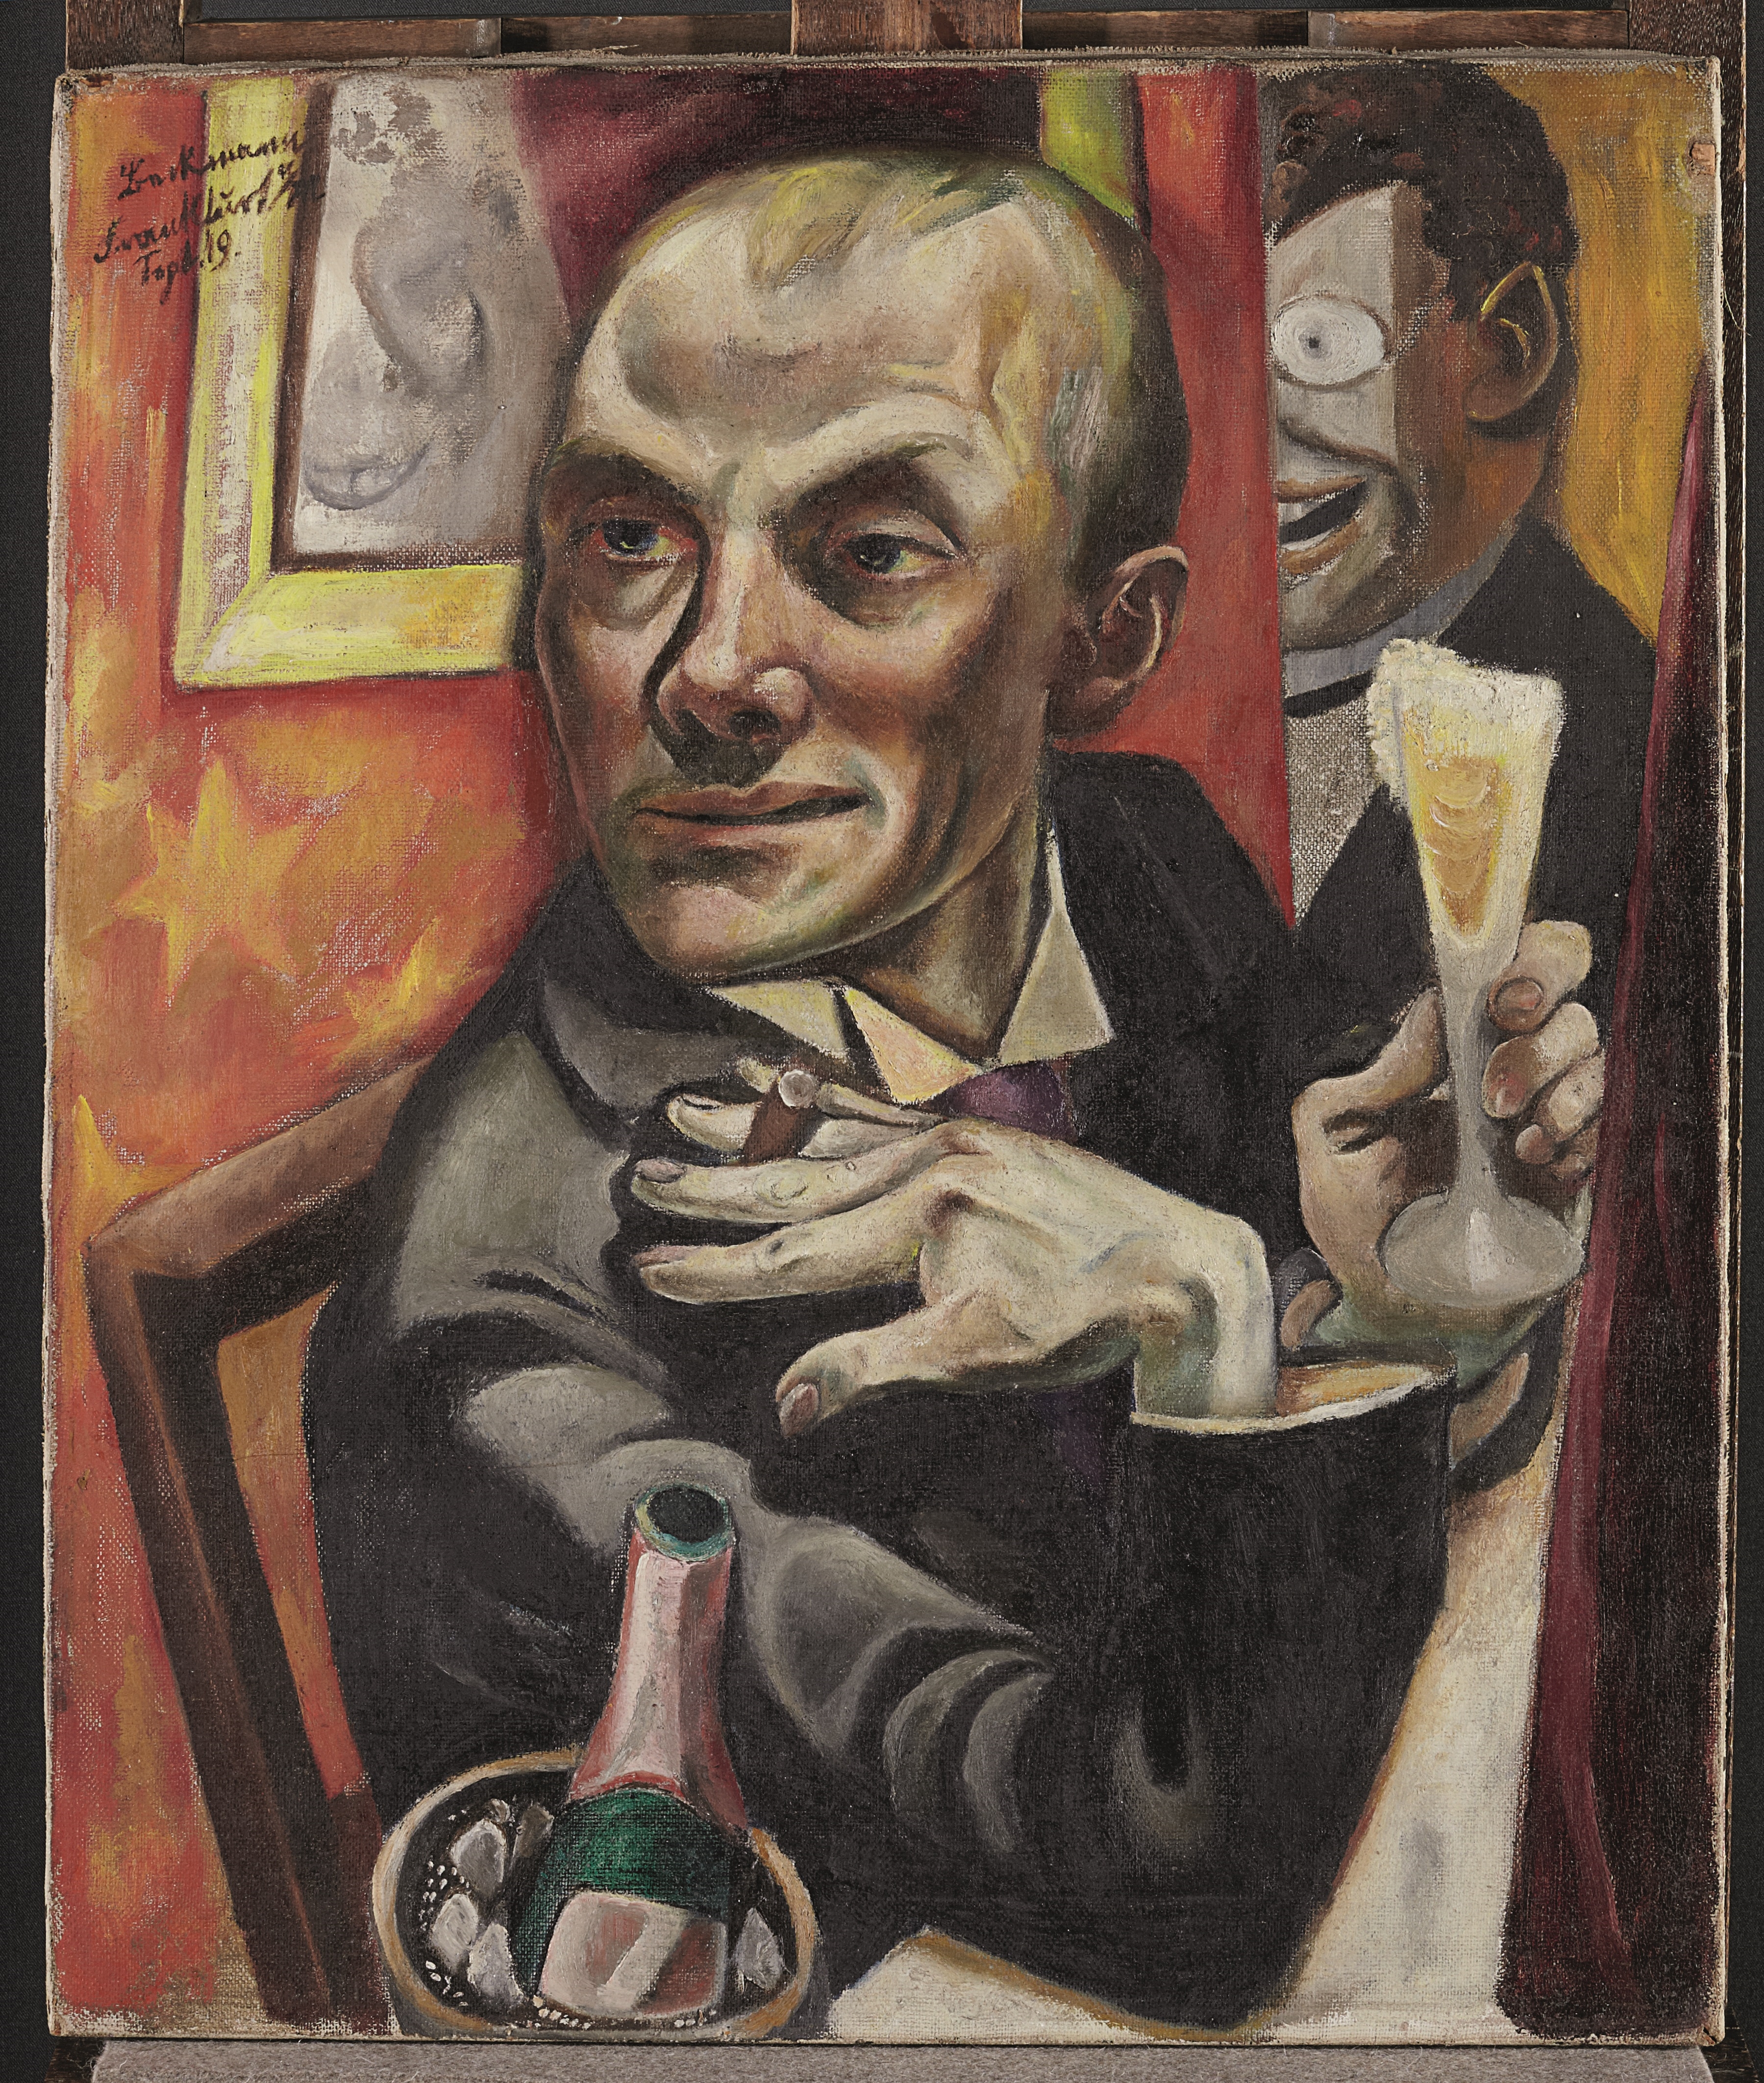 Max Beckmann and Berlin the